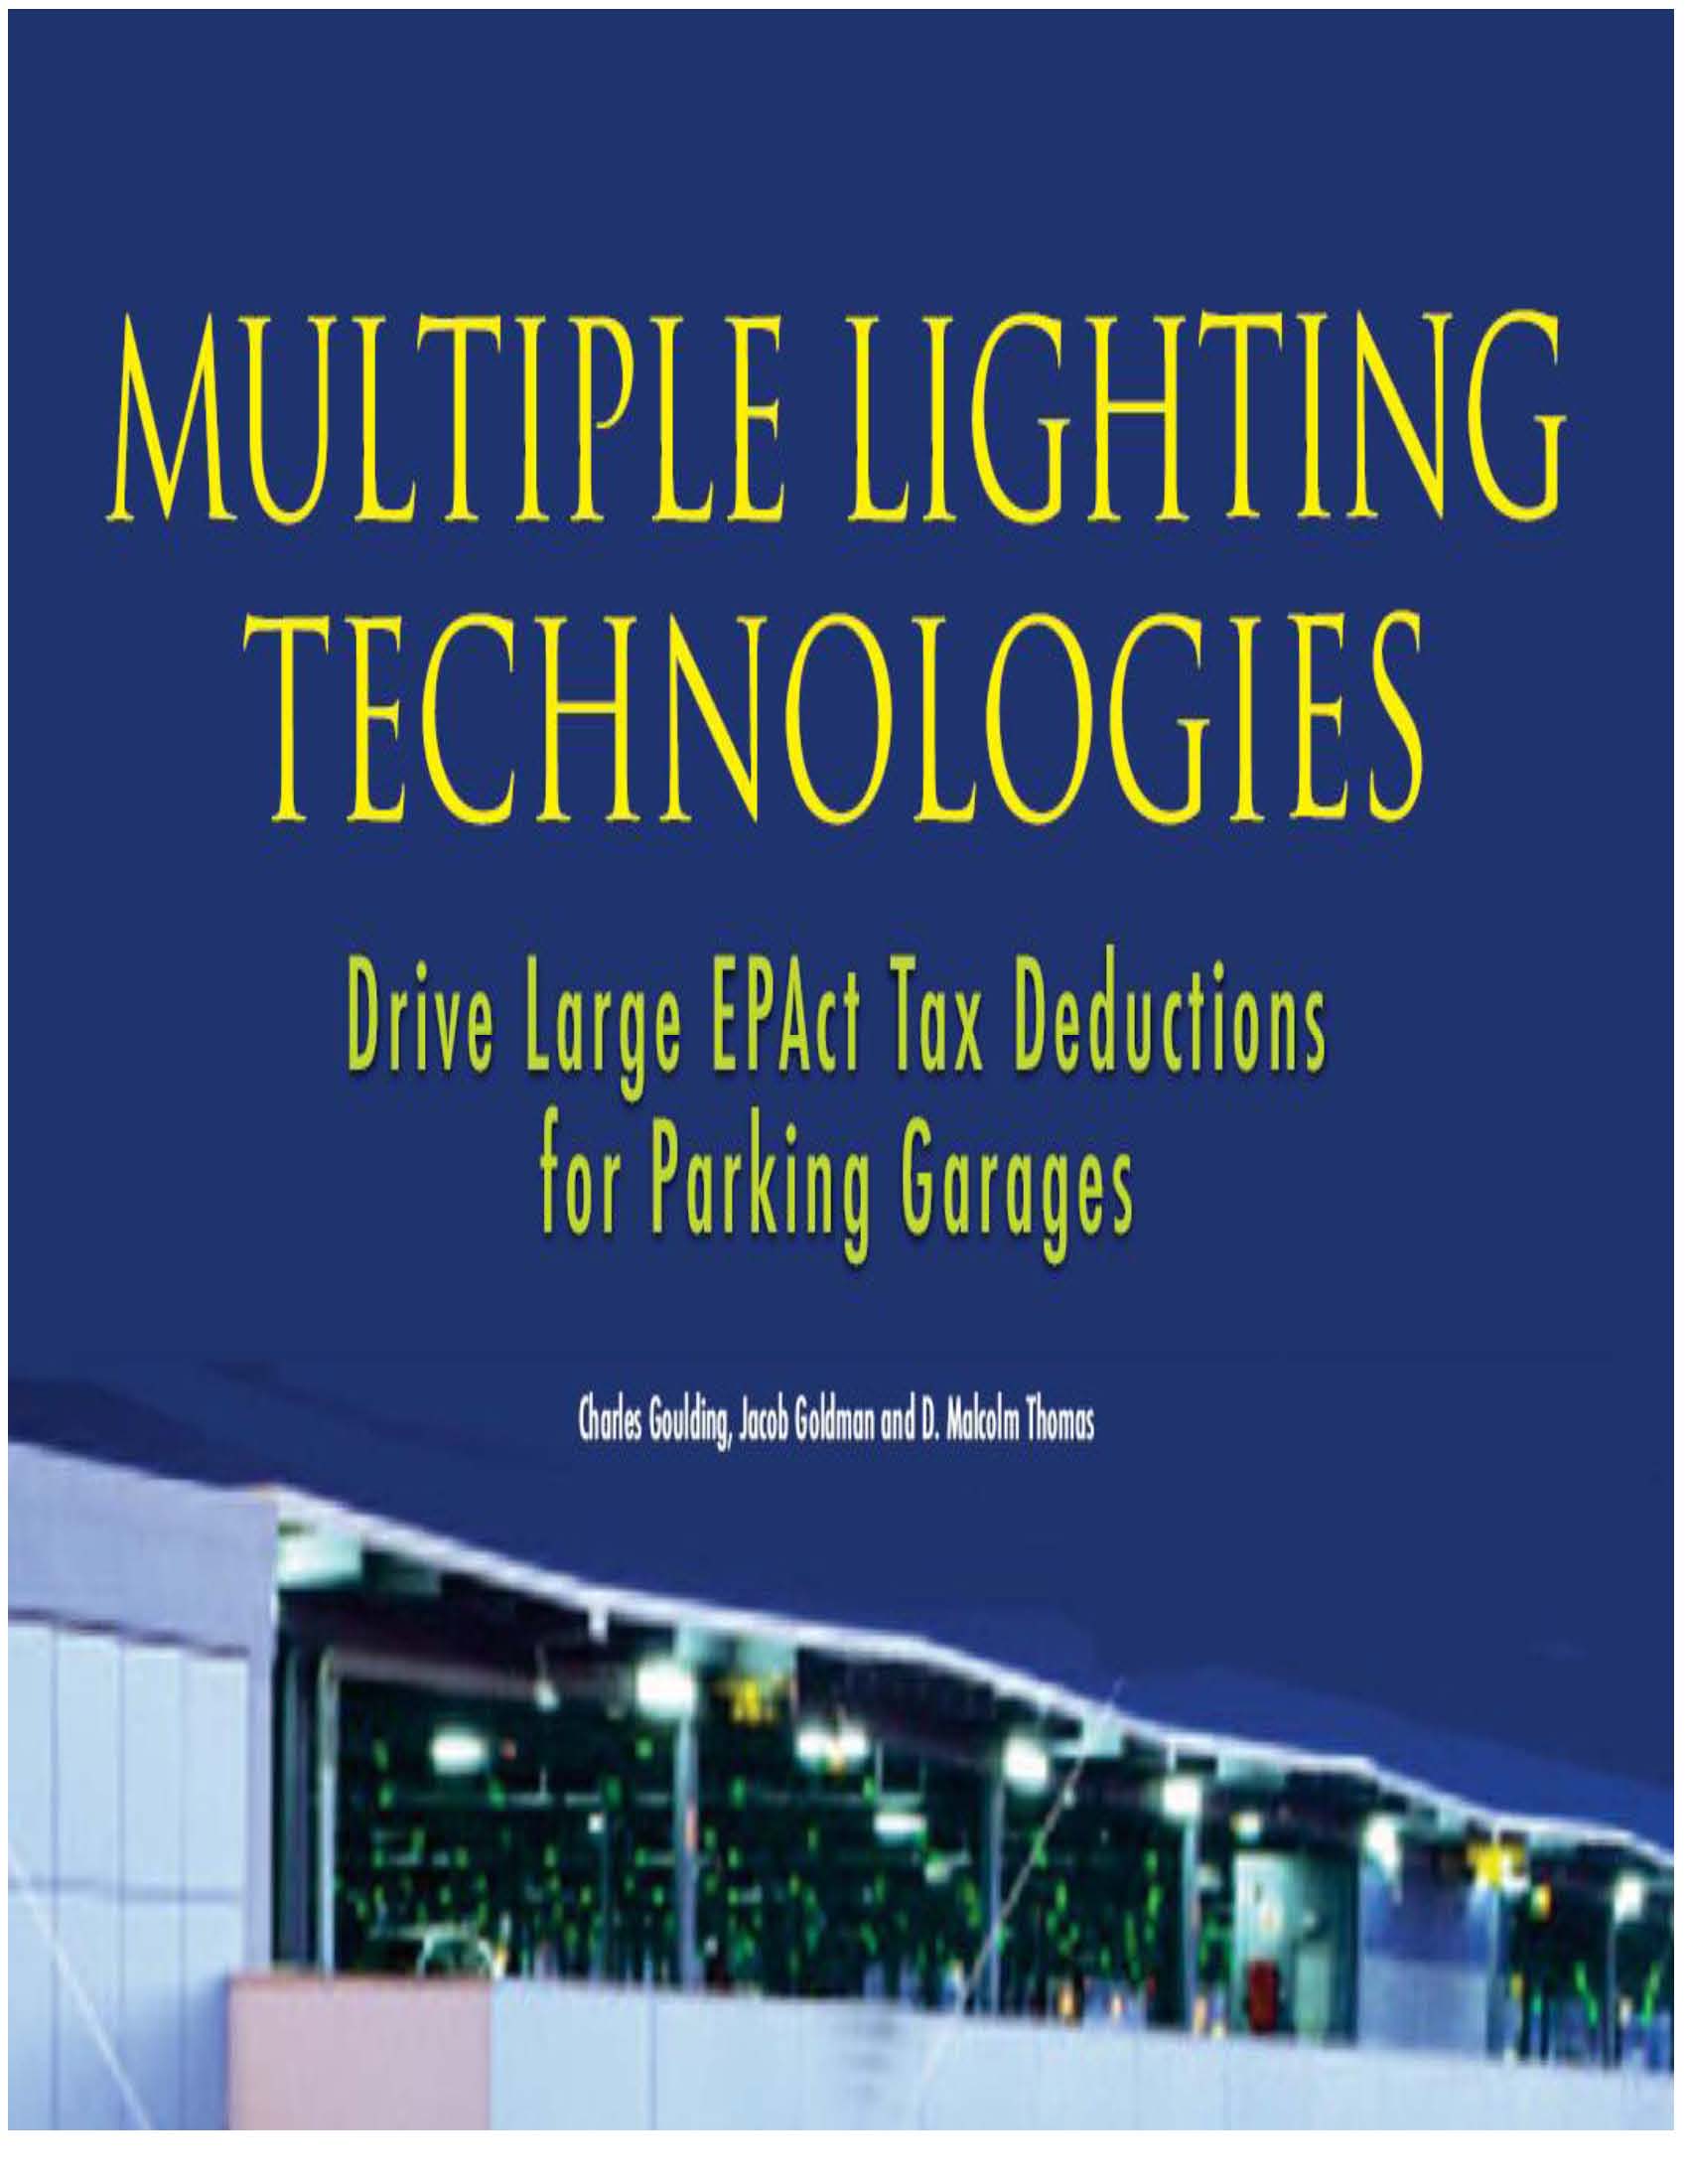 Multiple Lighting Technologies Drive Large EPAct Tax Deductions for Parking Garages